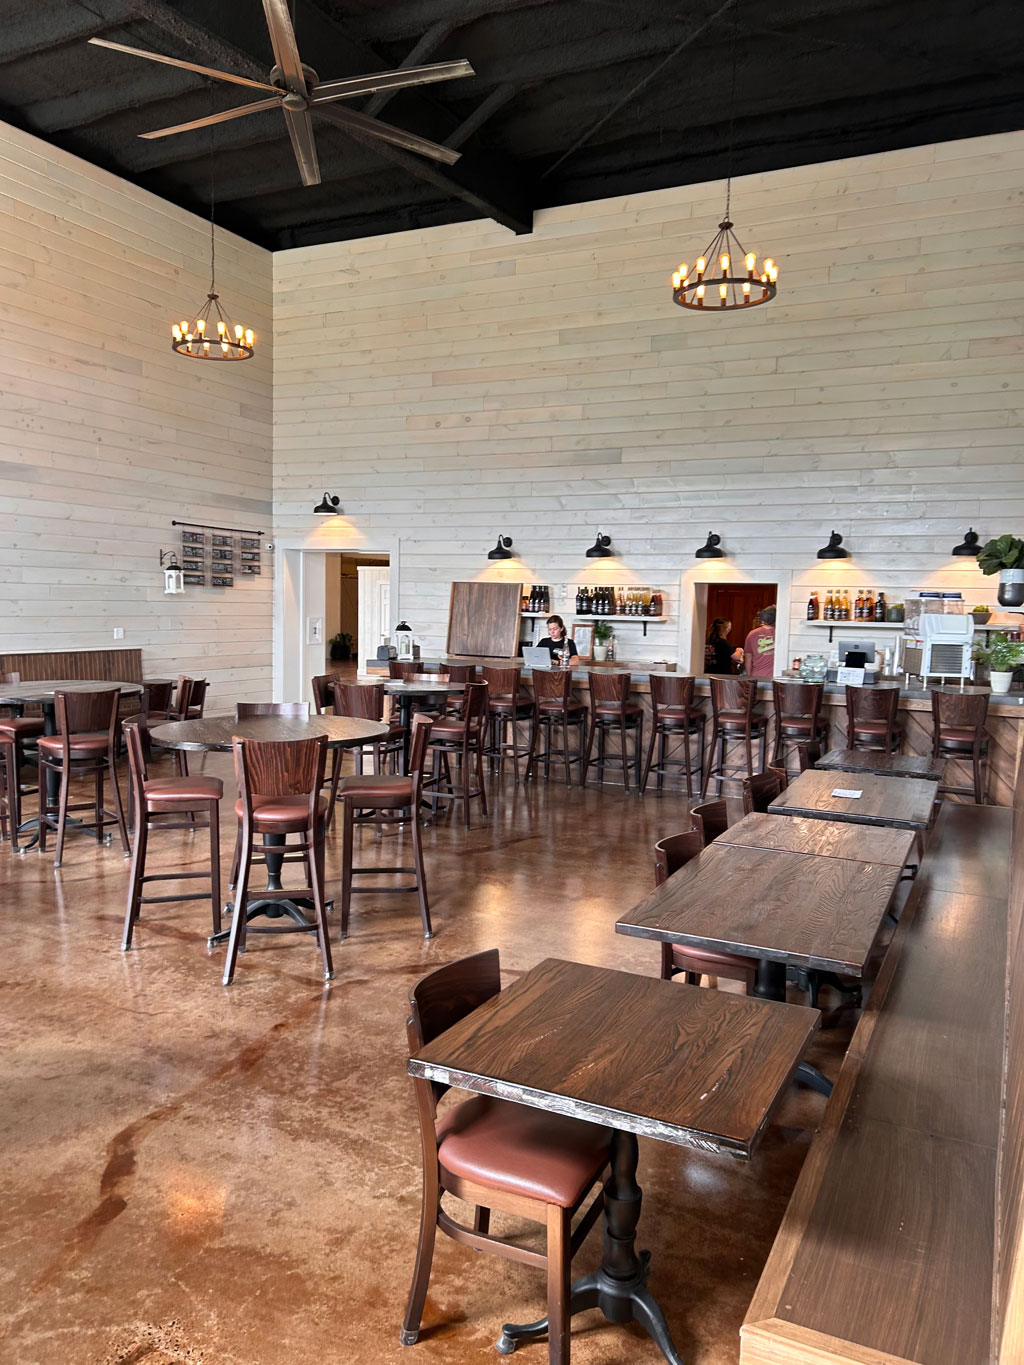 An large open room with deep wood tables with leather seats. Concrete floors are custom stained with warm, rich brown hues with rustic chandelier lighting and white shiplap walls.